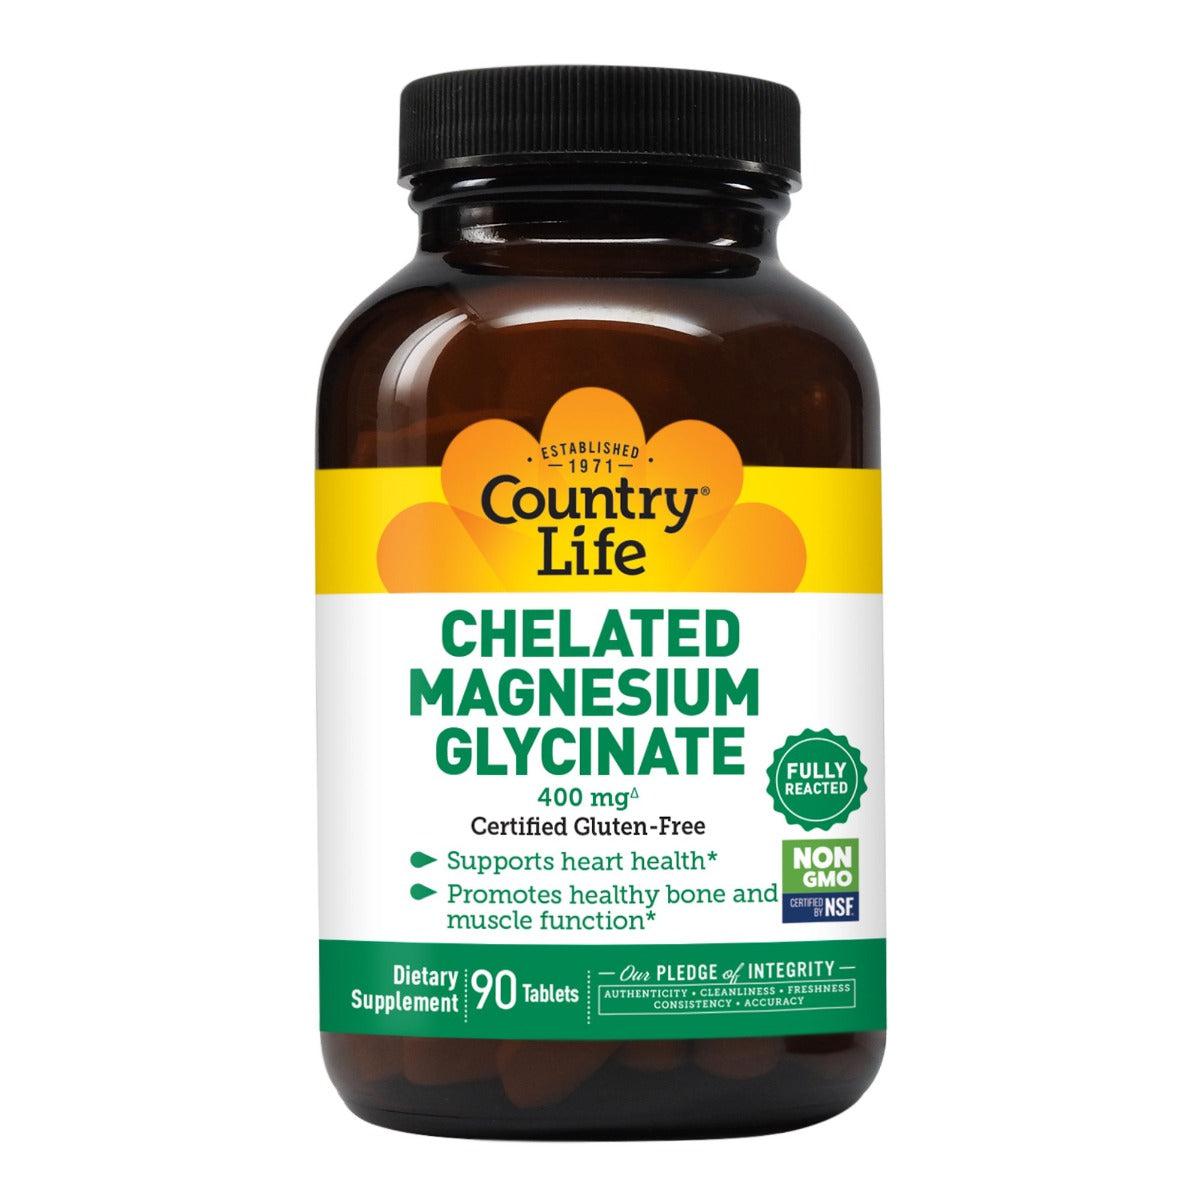 Country Life Chelated Magnesium Glycinate 400mg Non-GMO Vegan 90 Tablets